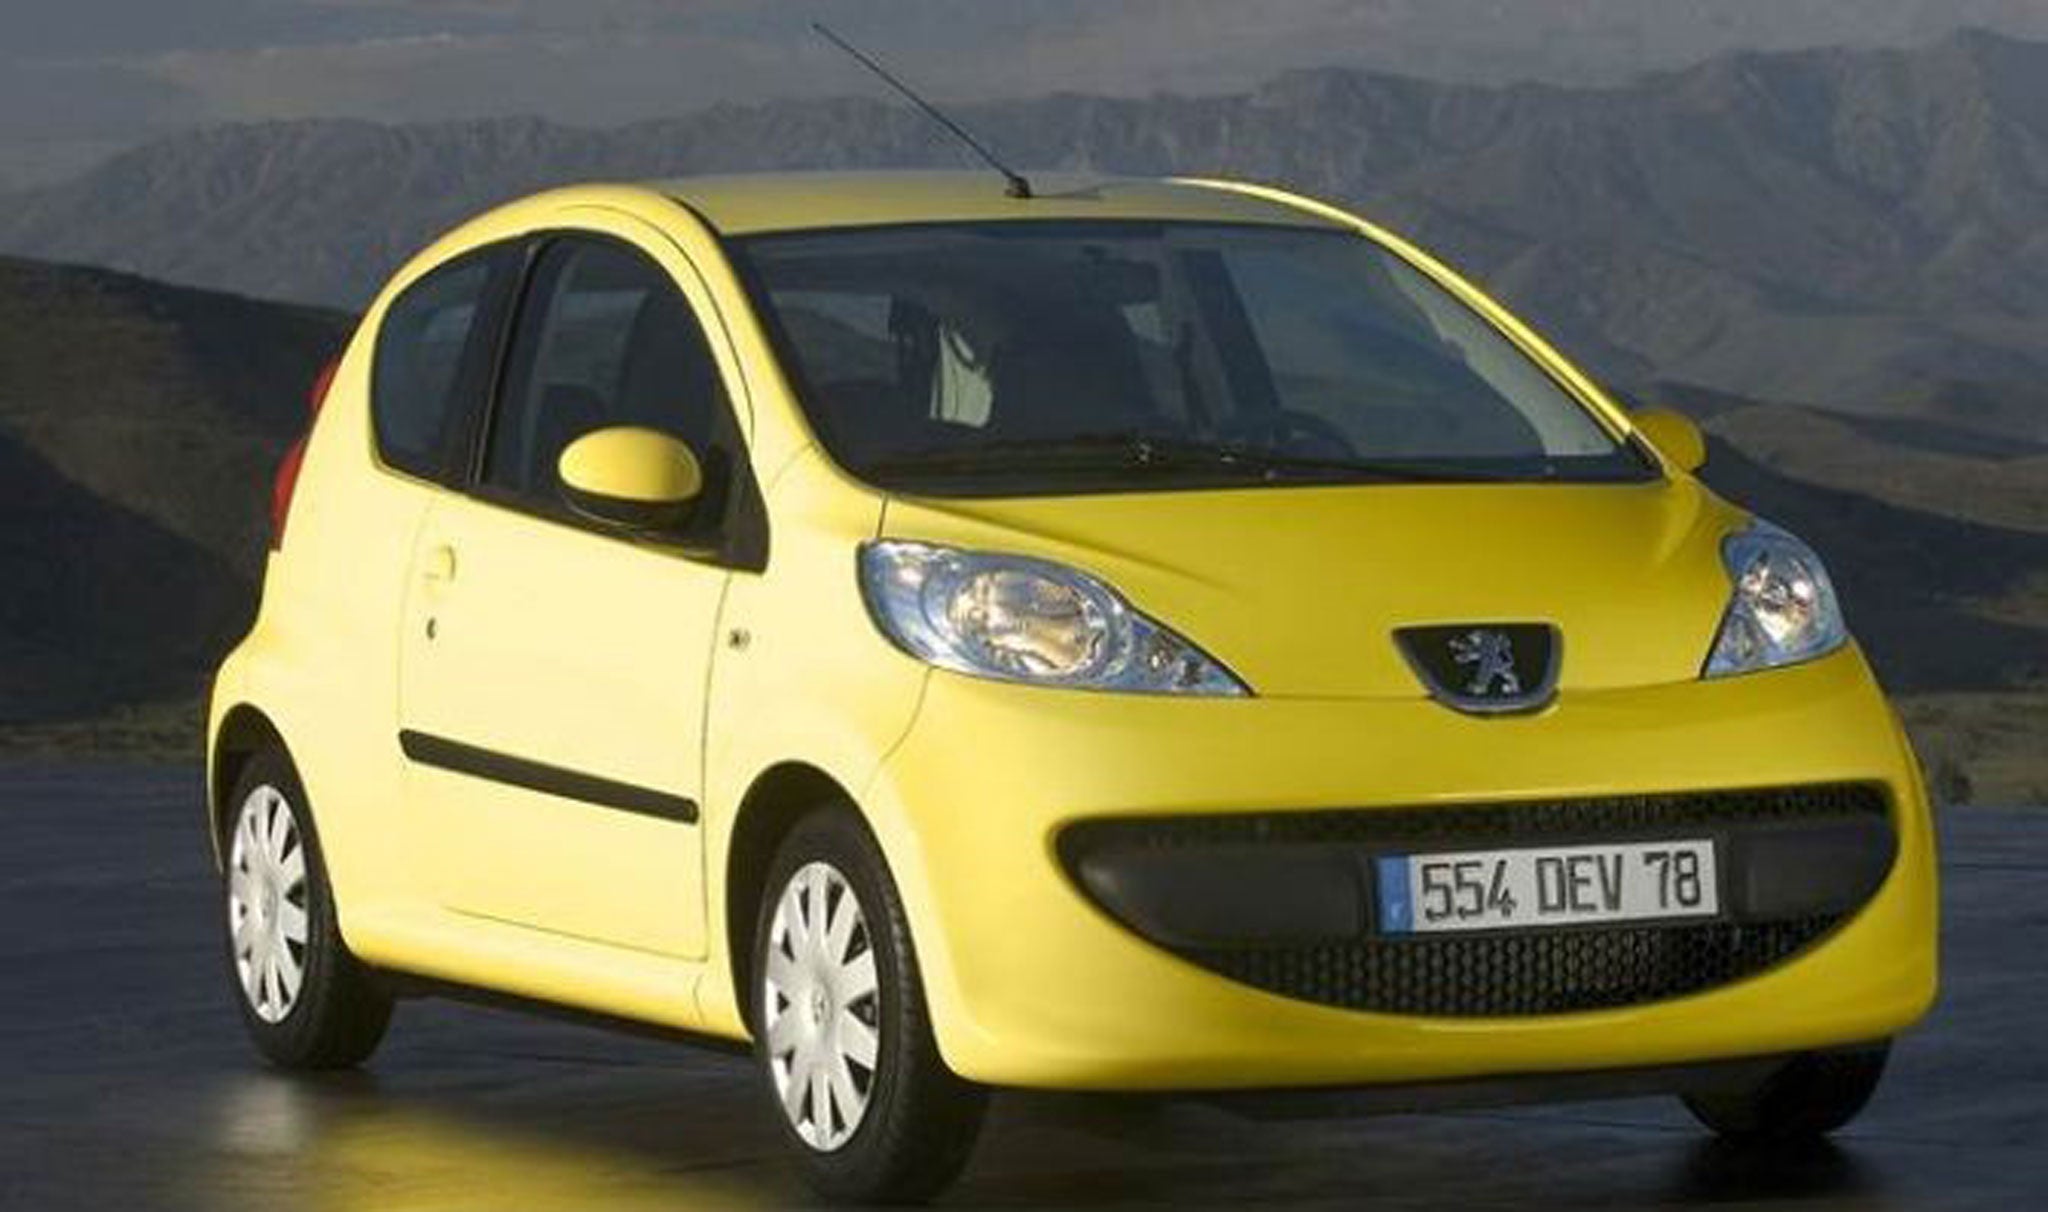 The Peugeot 107 is a great, modern little car that is funky outside and in